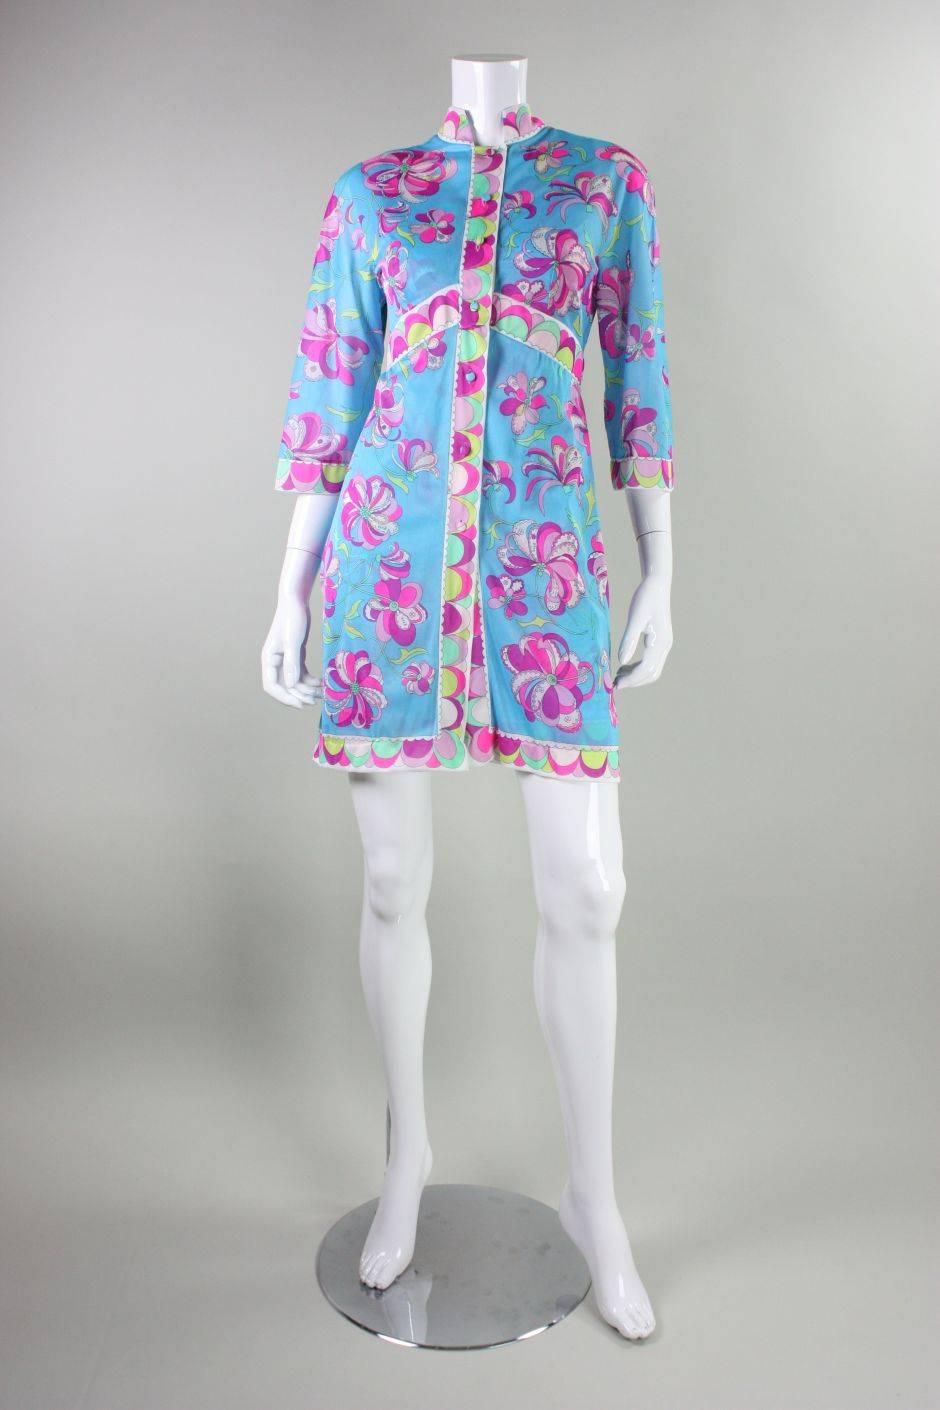 Vintage robe and nightgown/slip set by Emilio Pucci for Formfit Rogers dates to the 1960's through early 1970's.  It is made of aqua blue nylon that features a bold and bright floral pattern.  Robe has mandarin collar and center front covered button